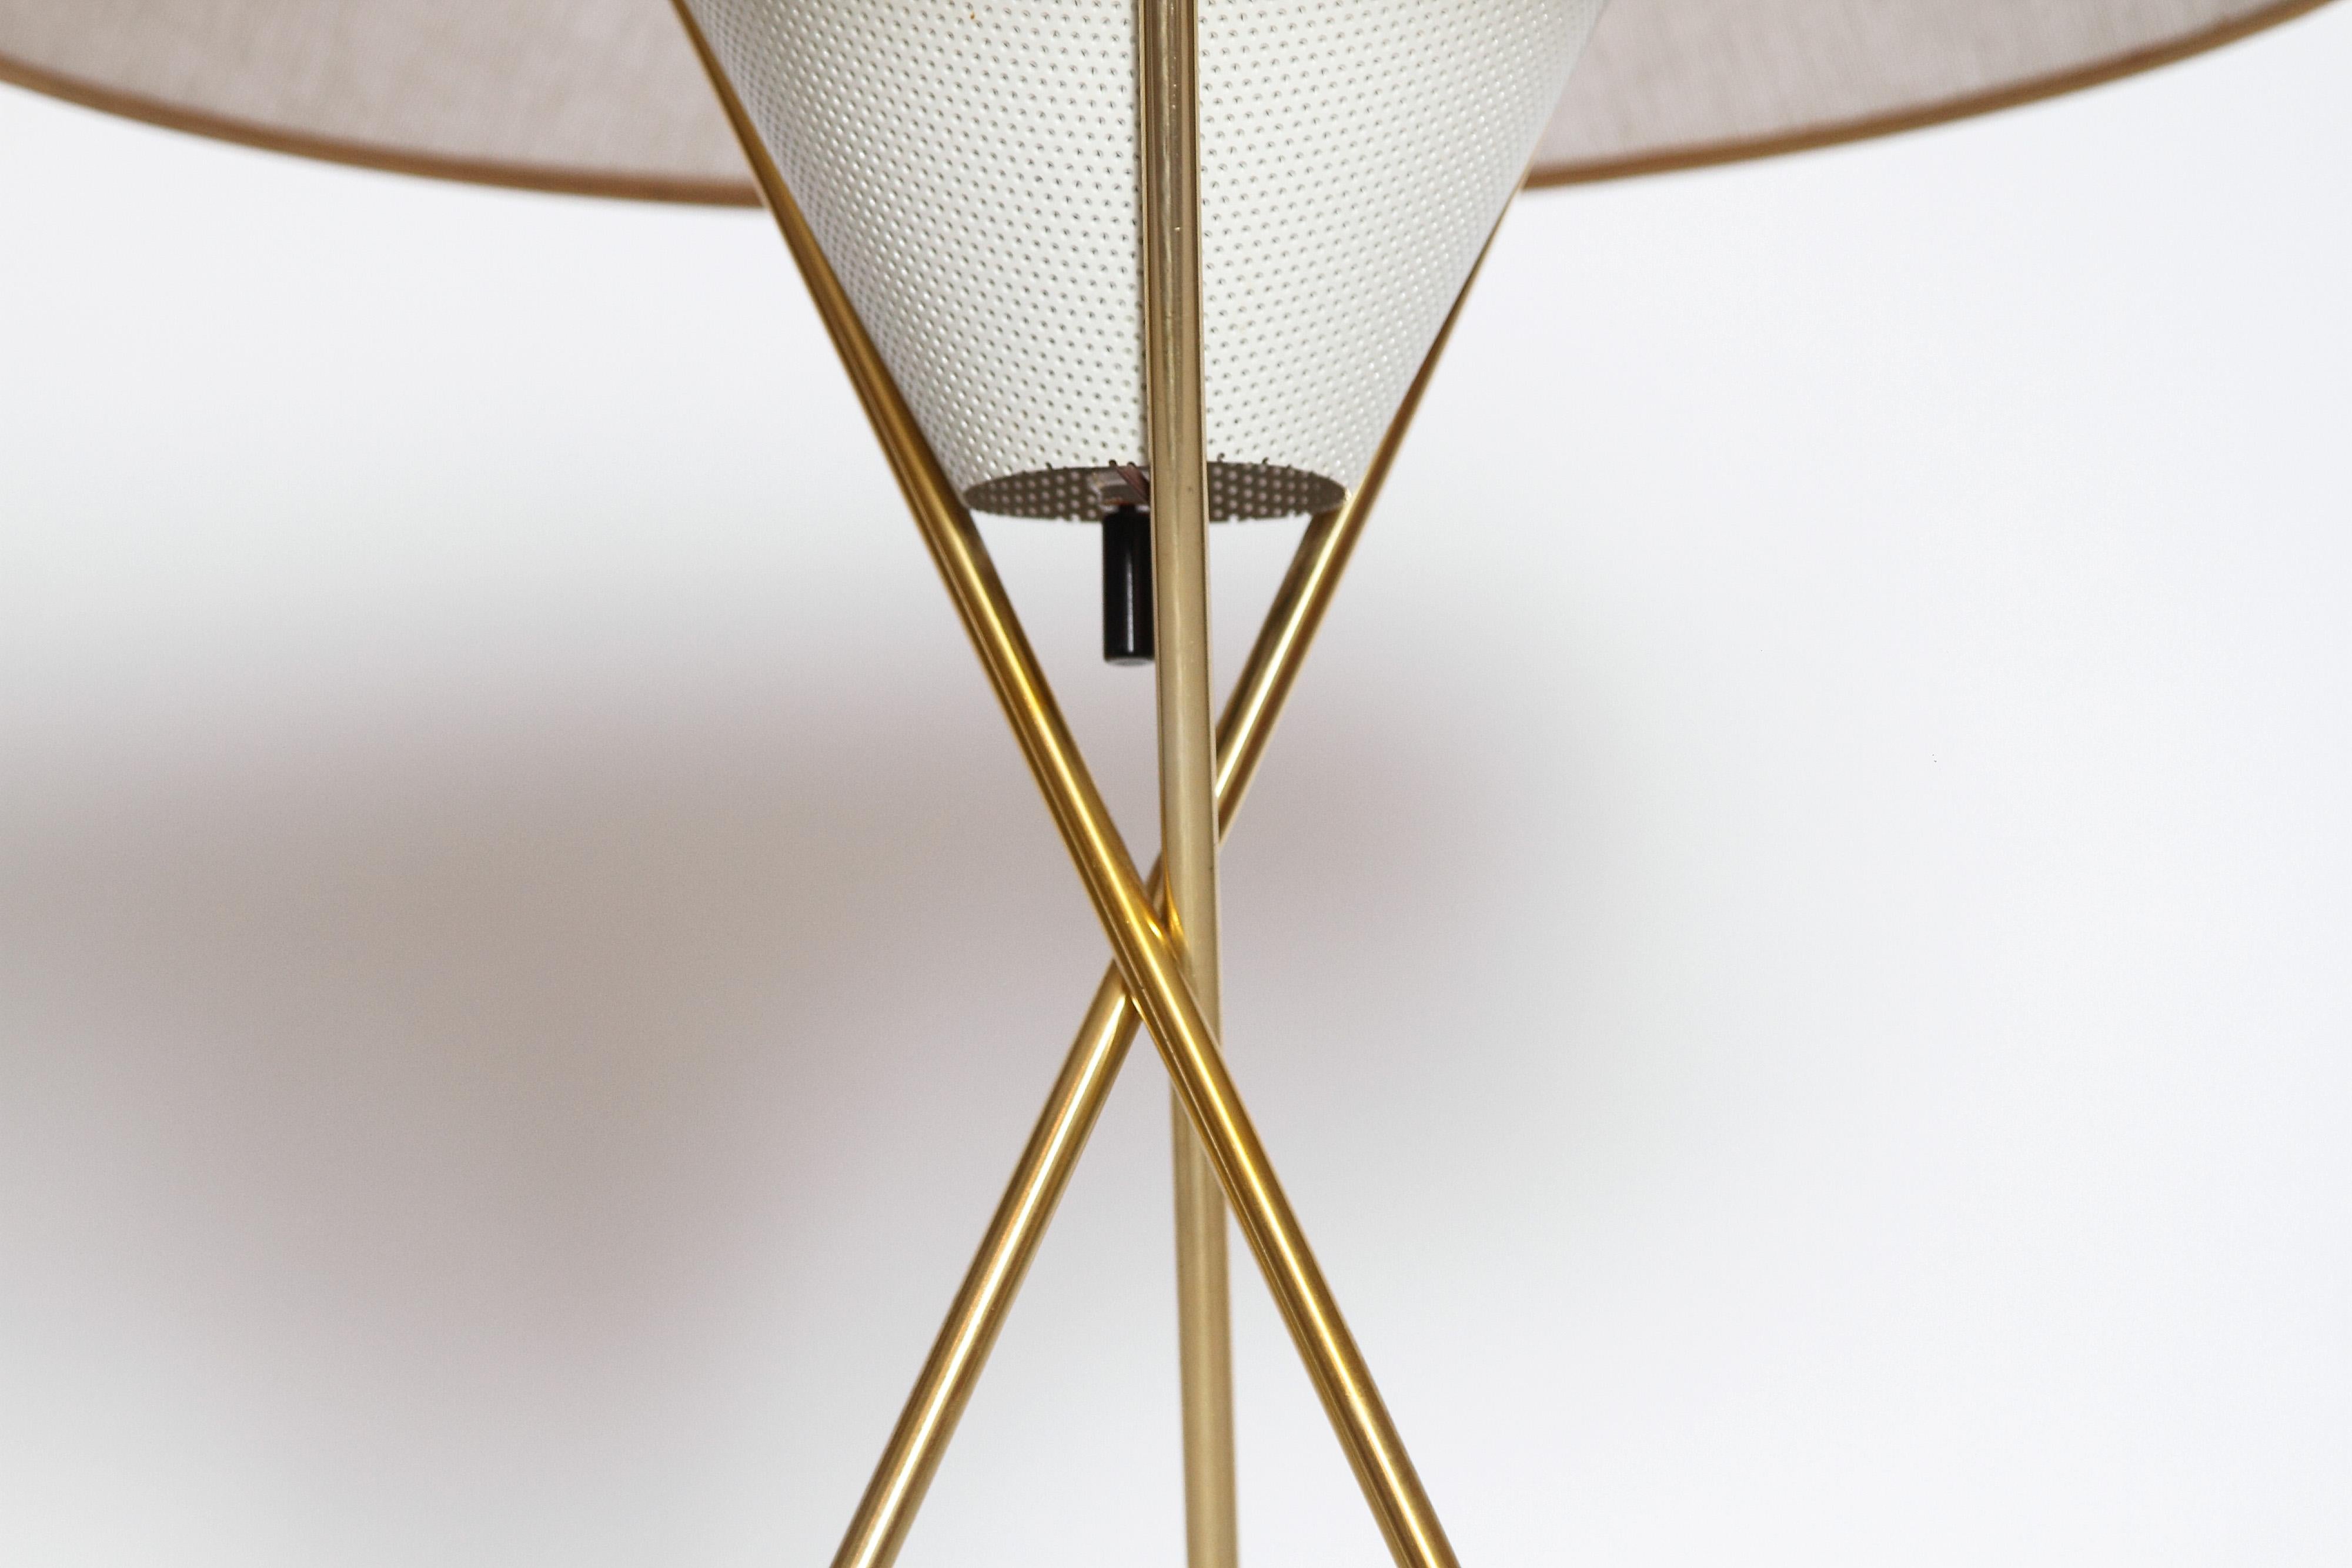 American Mid-Century Modern Tripod Table Lamp by Gerald Thurston for Lightolier